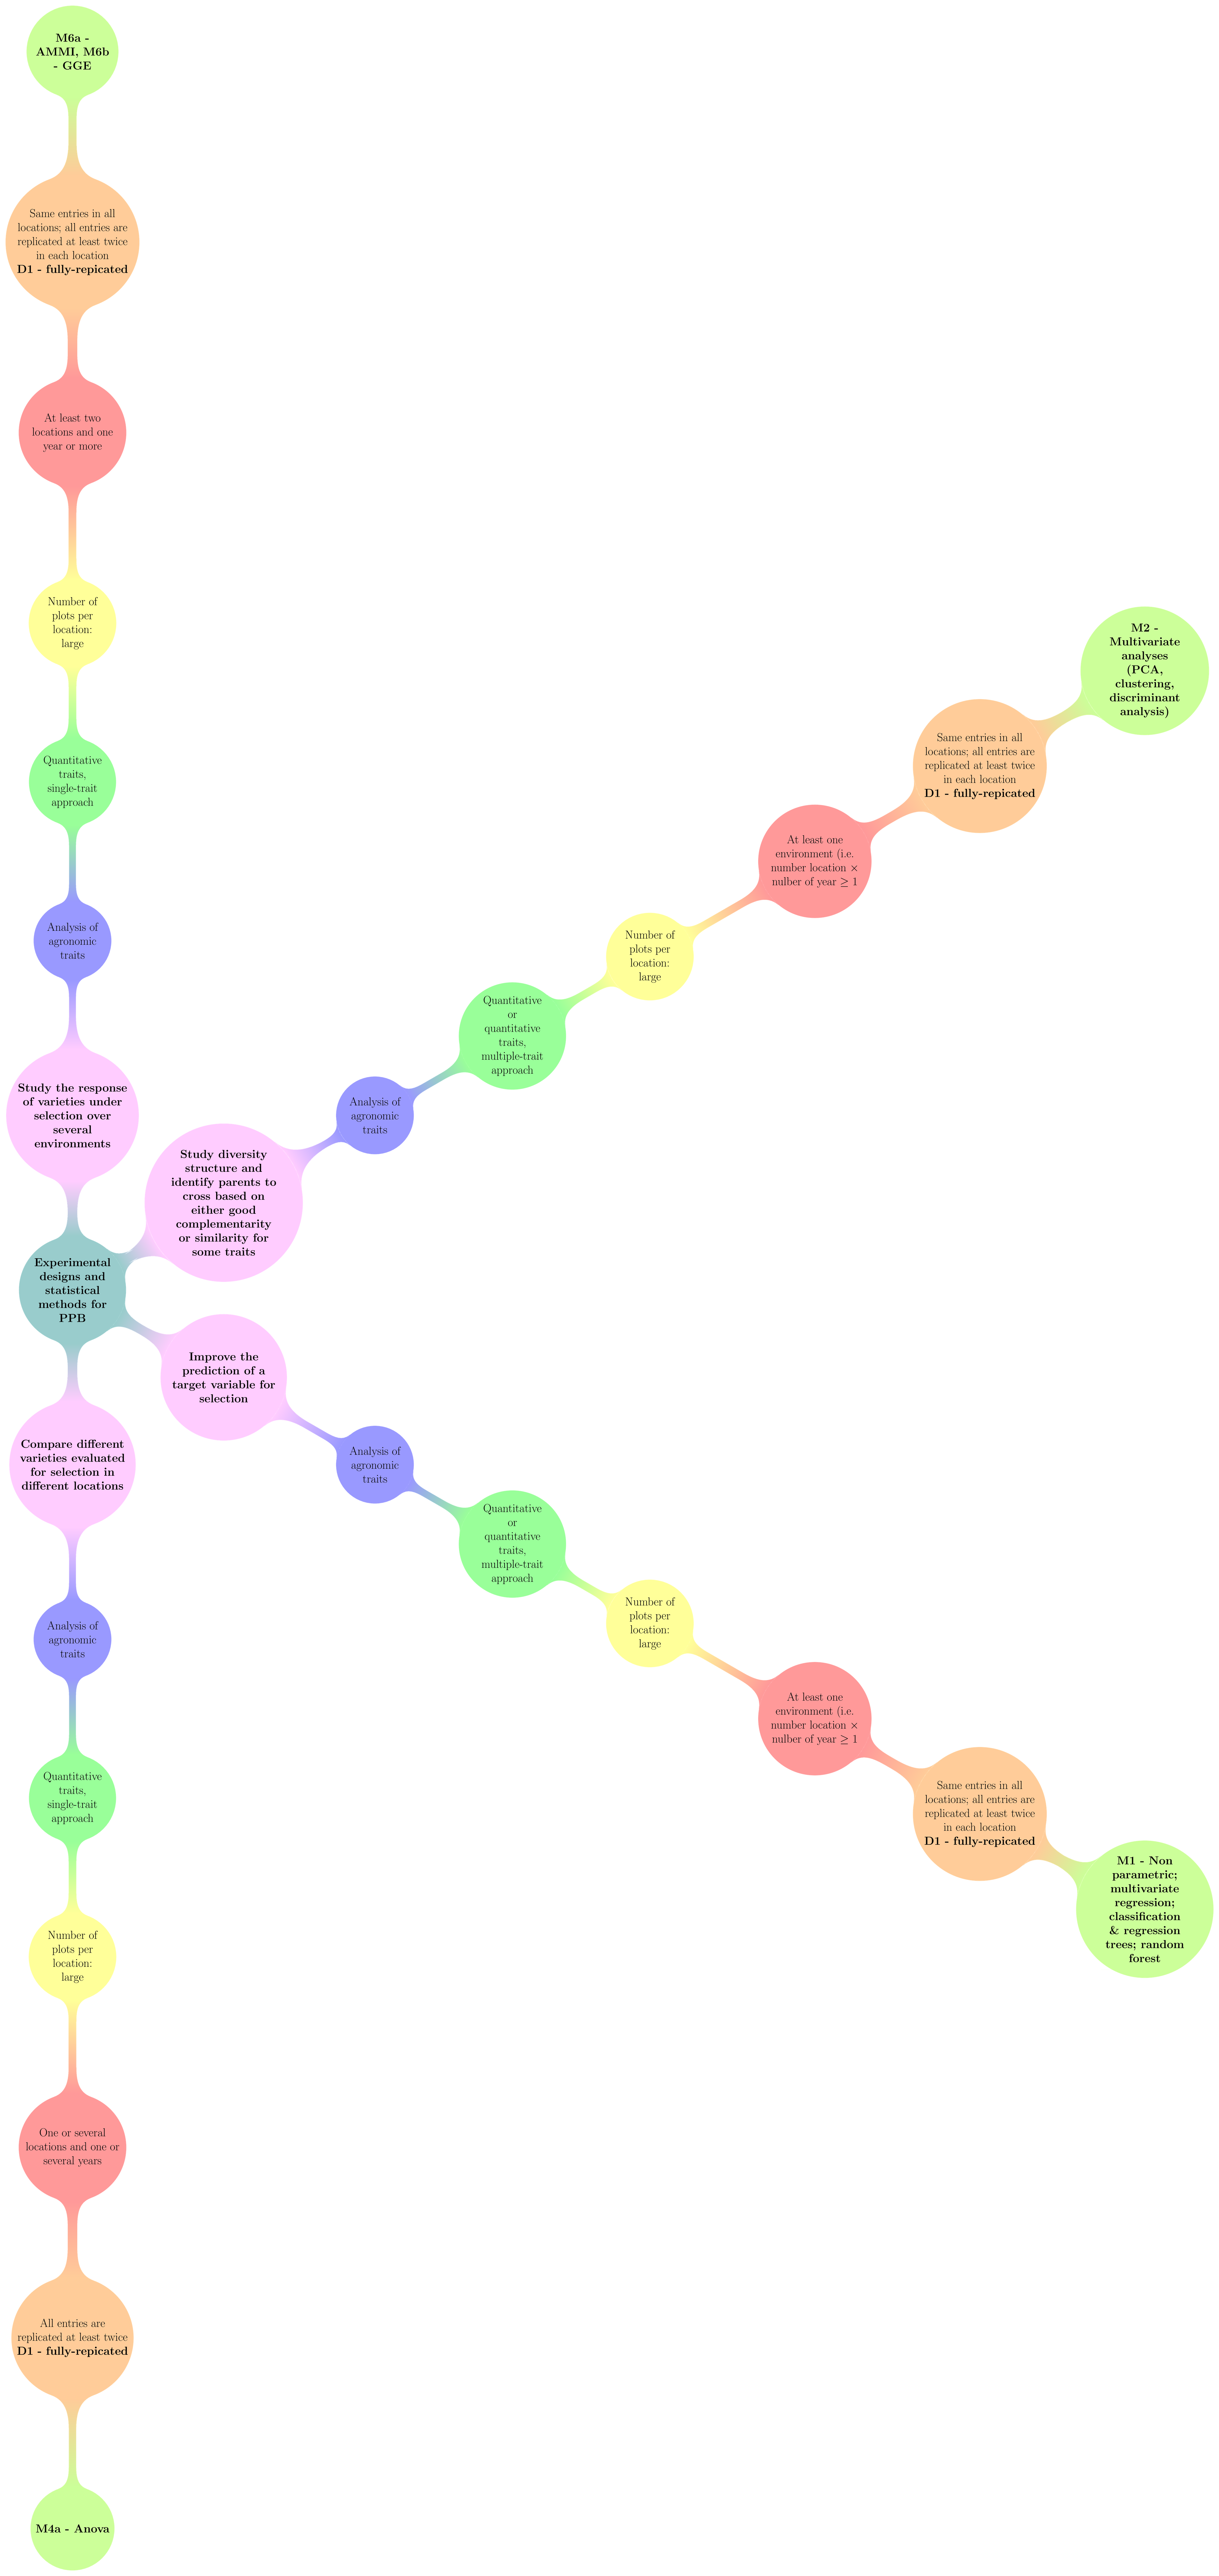 The decision tree where fully-replicated designs are used.